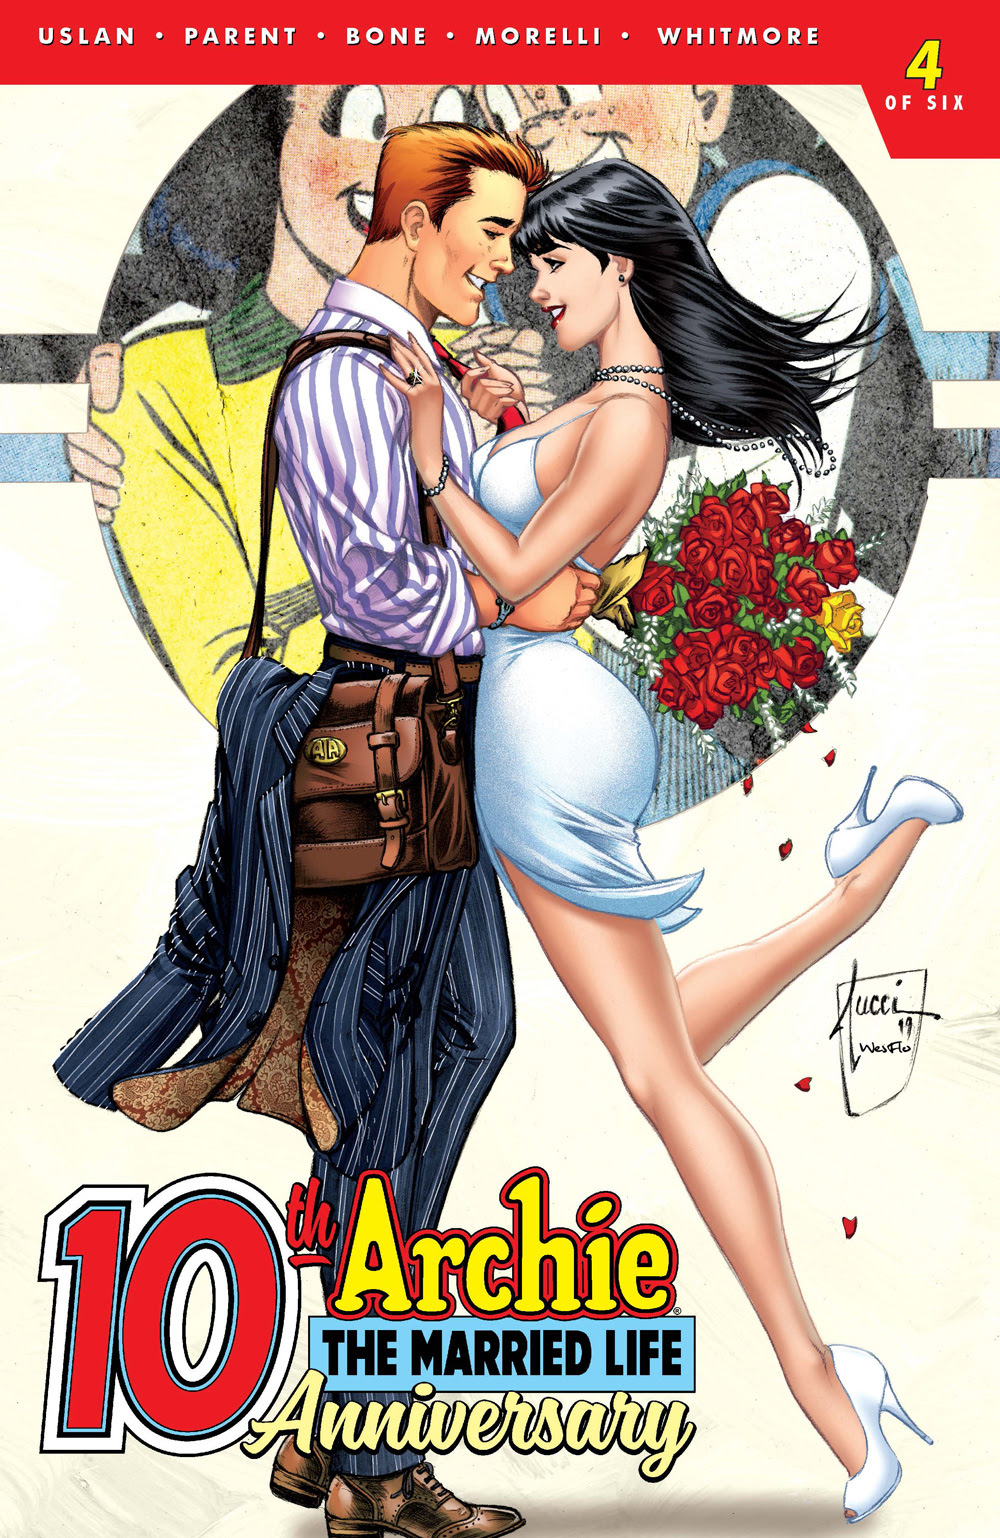 ARCHIE THE MARRIED LIFE: 10th ANNIVERSARY #4: CVR C Tucci